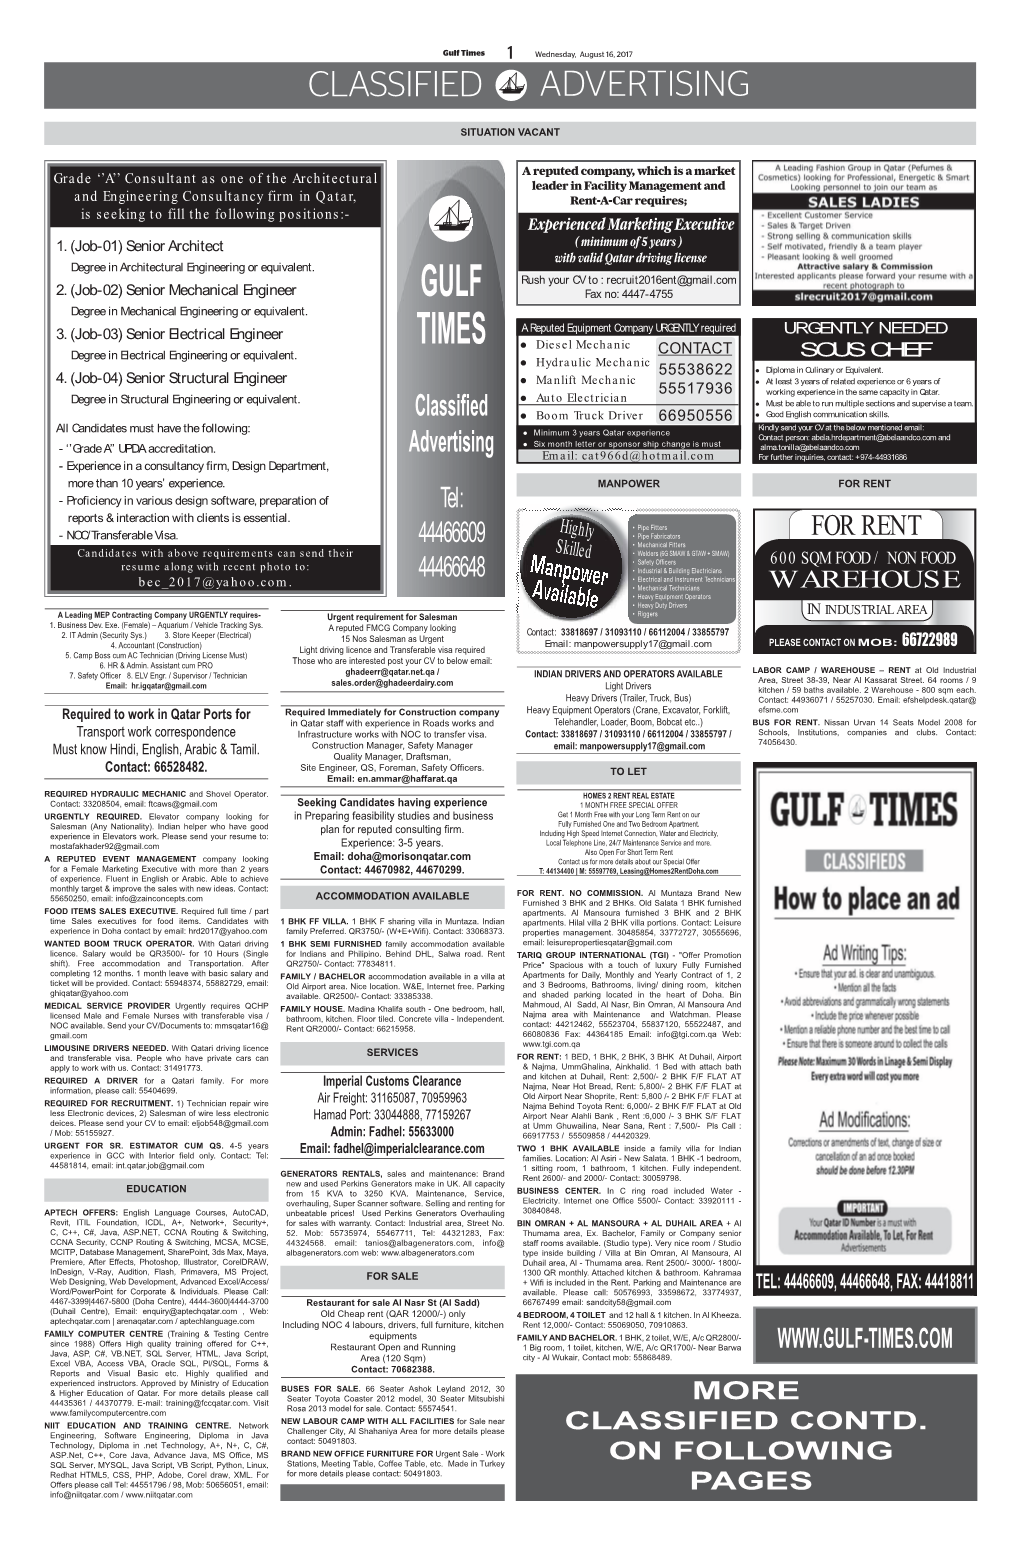 Gulf Times 1 Wednesday, August 16, 2017 CLASSIFIED ADVERTISING